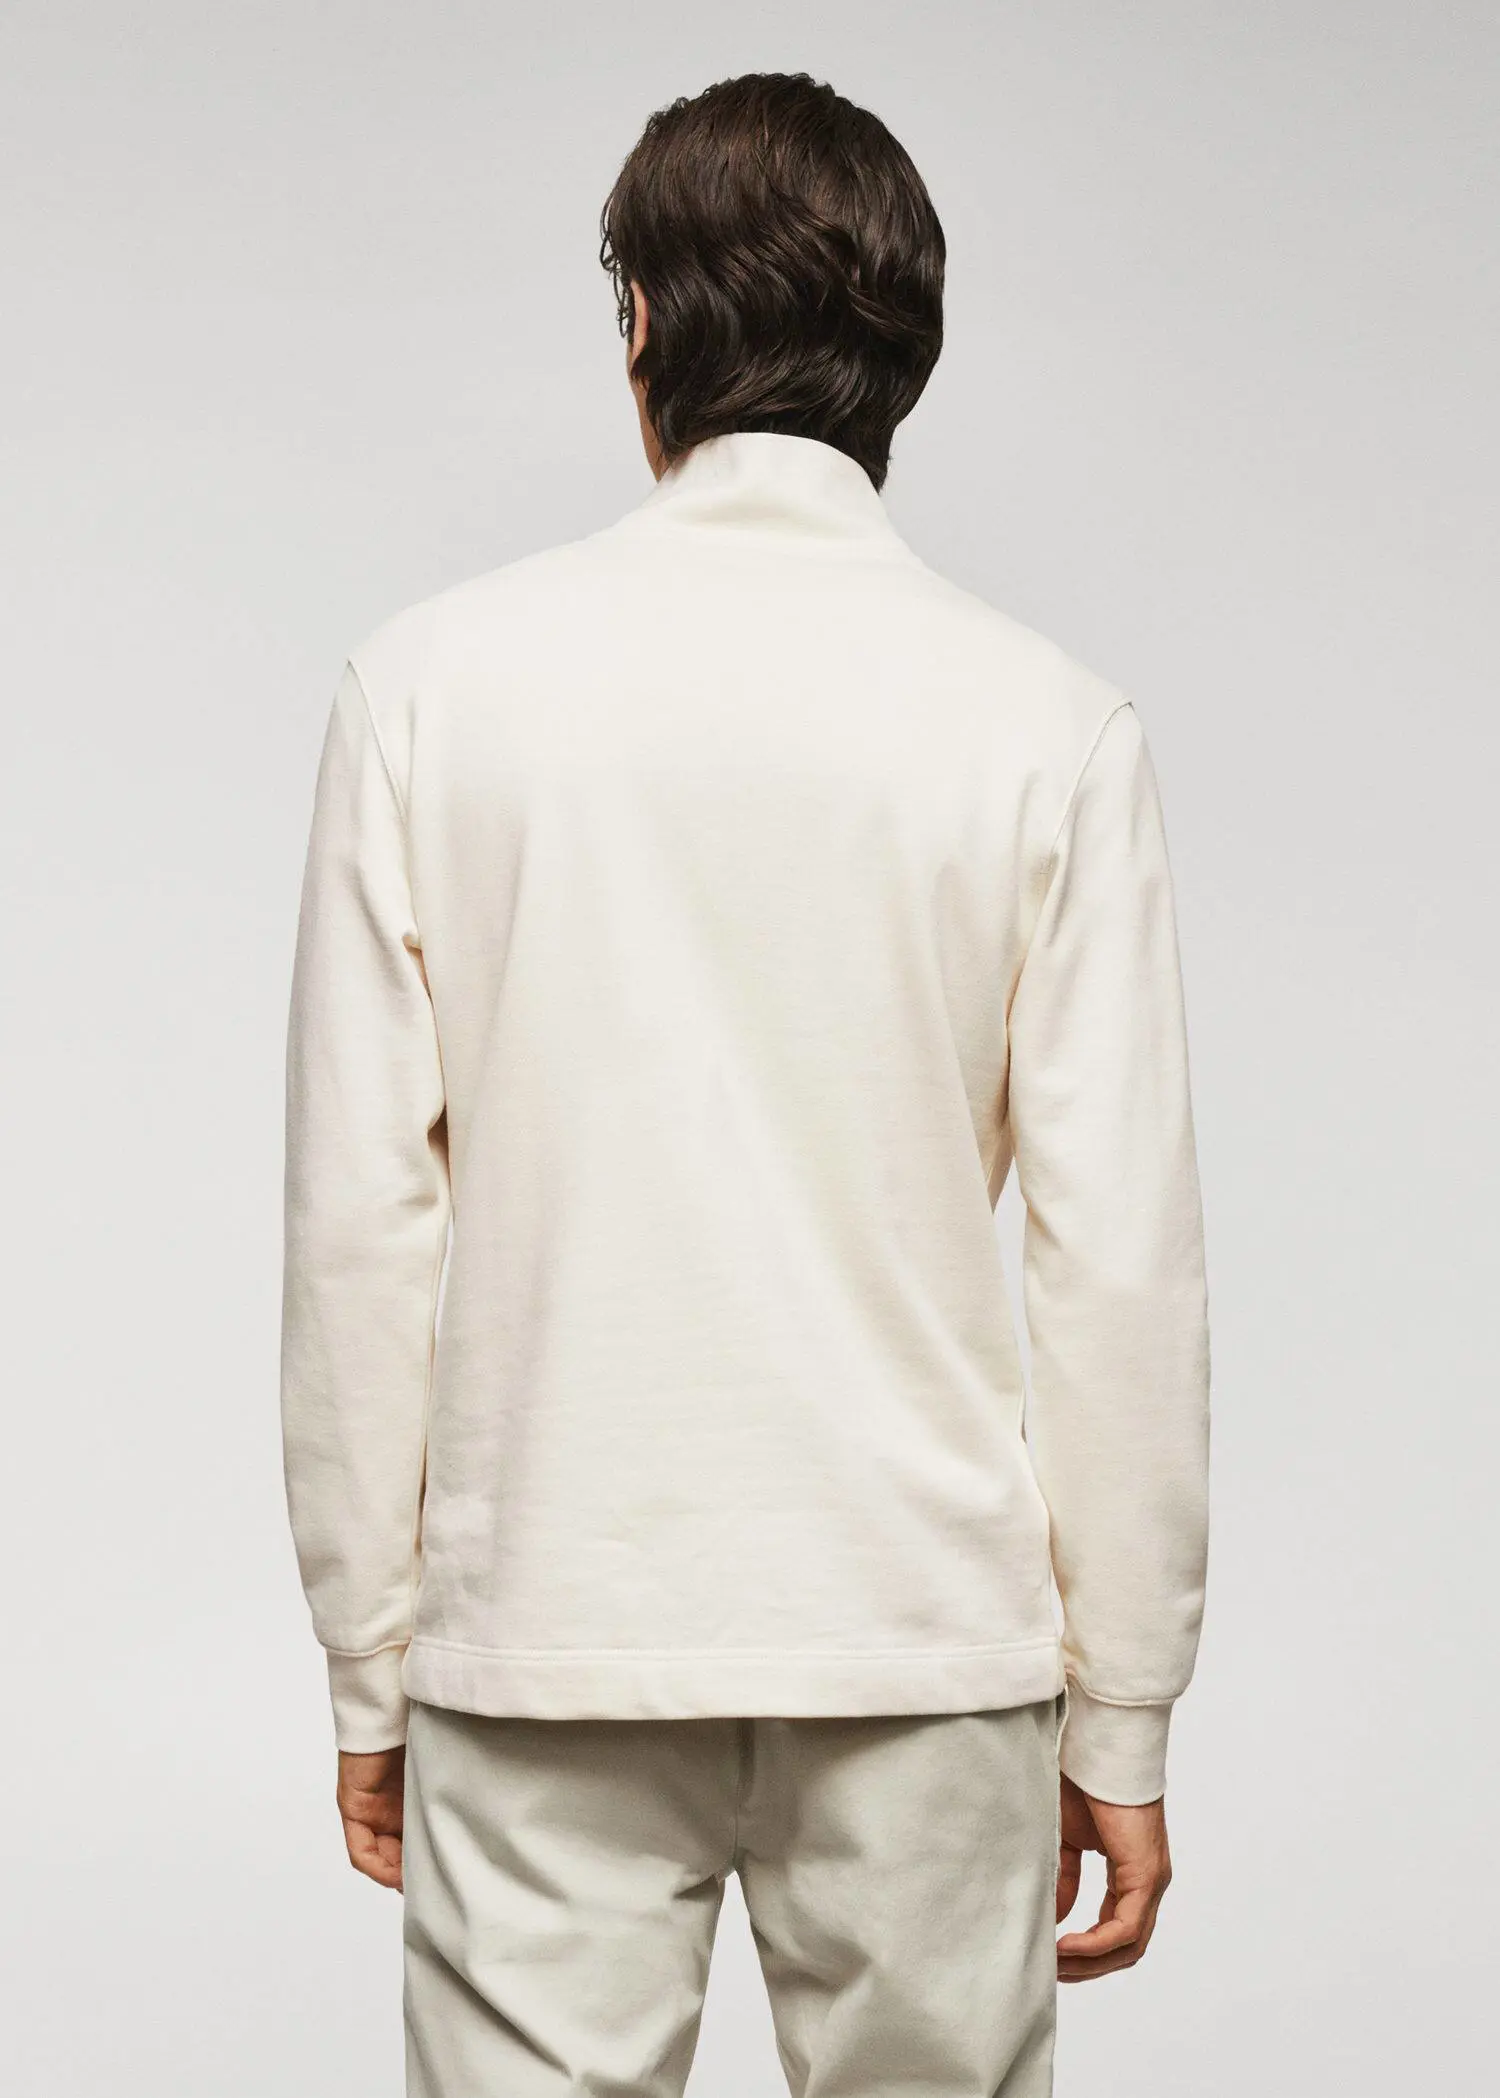 Mango Cotton sweatshirt with zipper neck. a man wearing a white jacket standing in front of a white wall. 